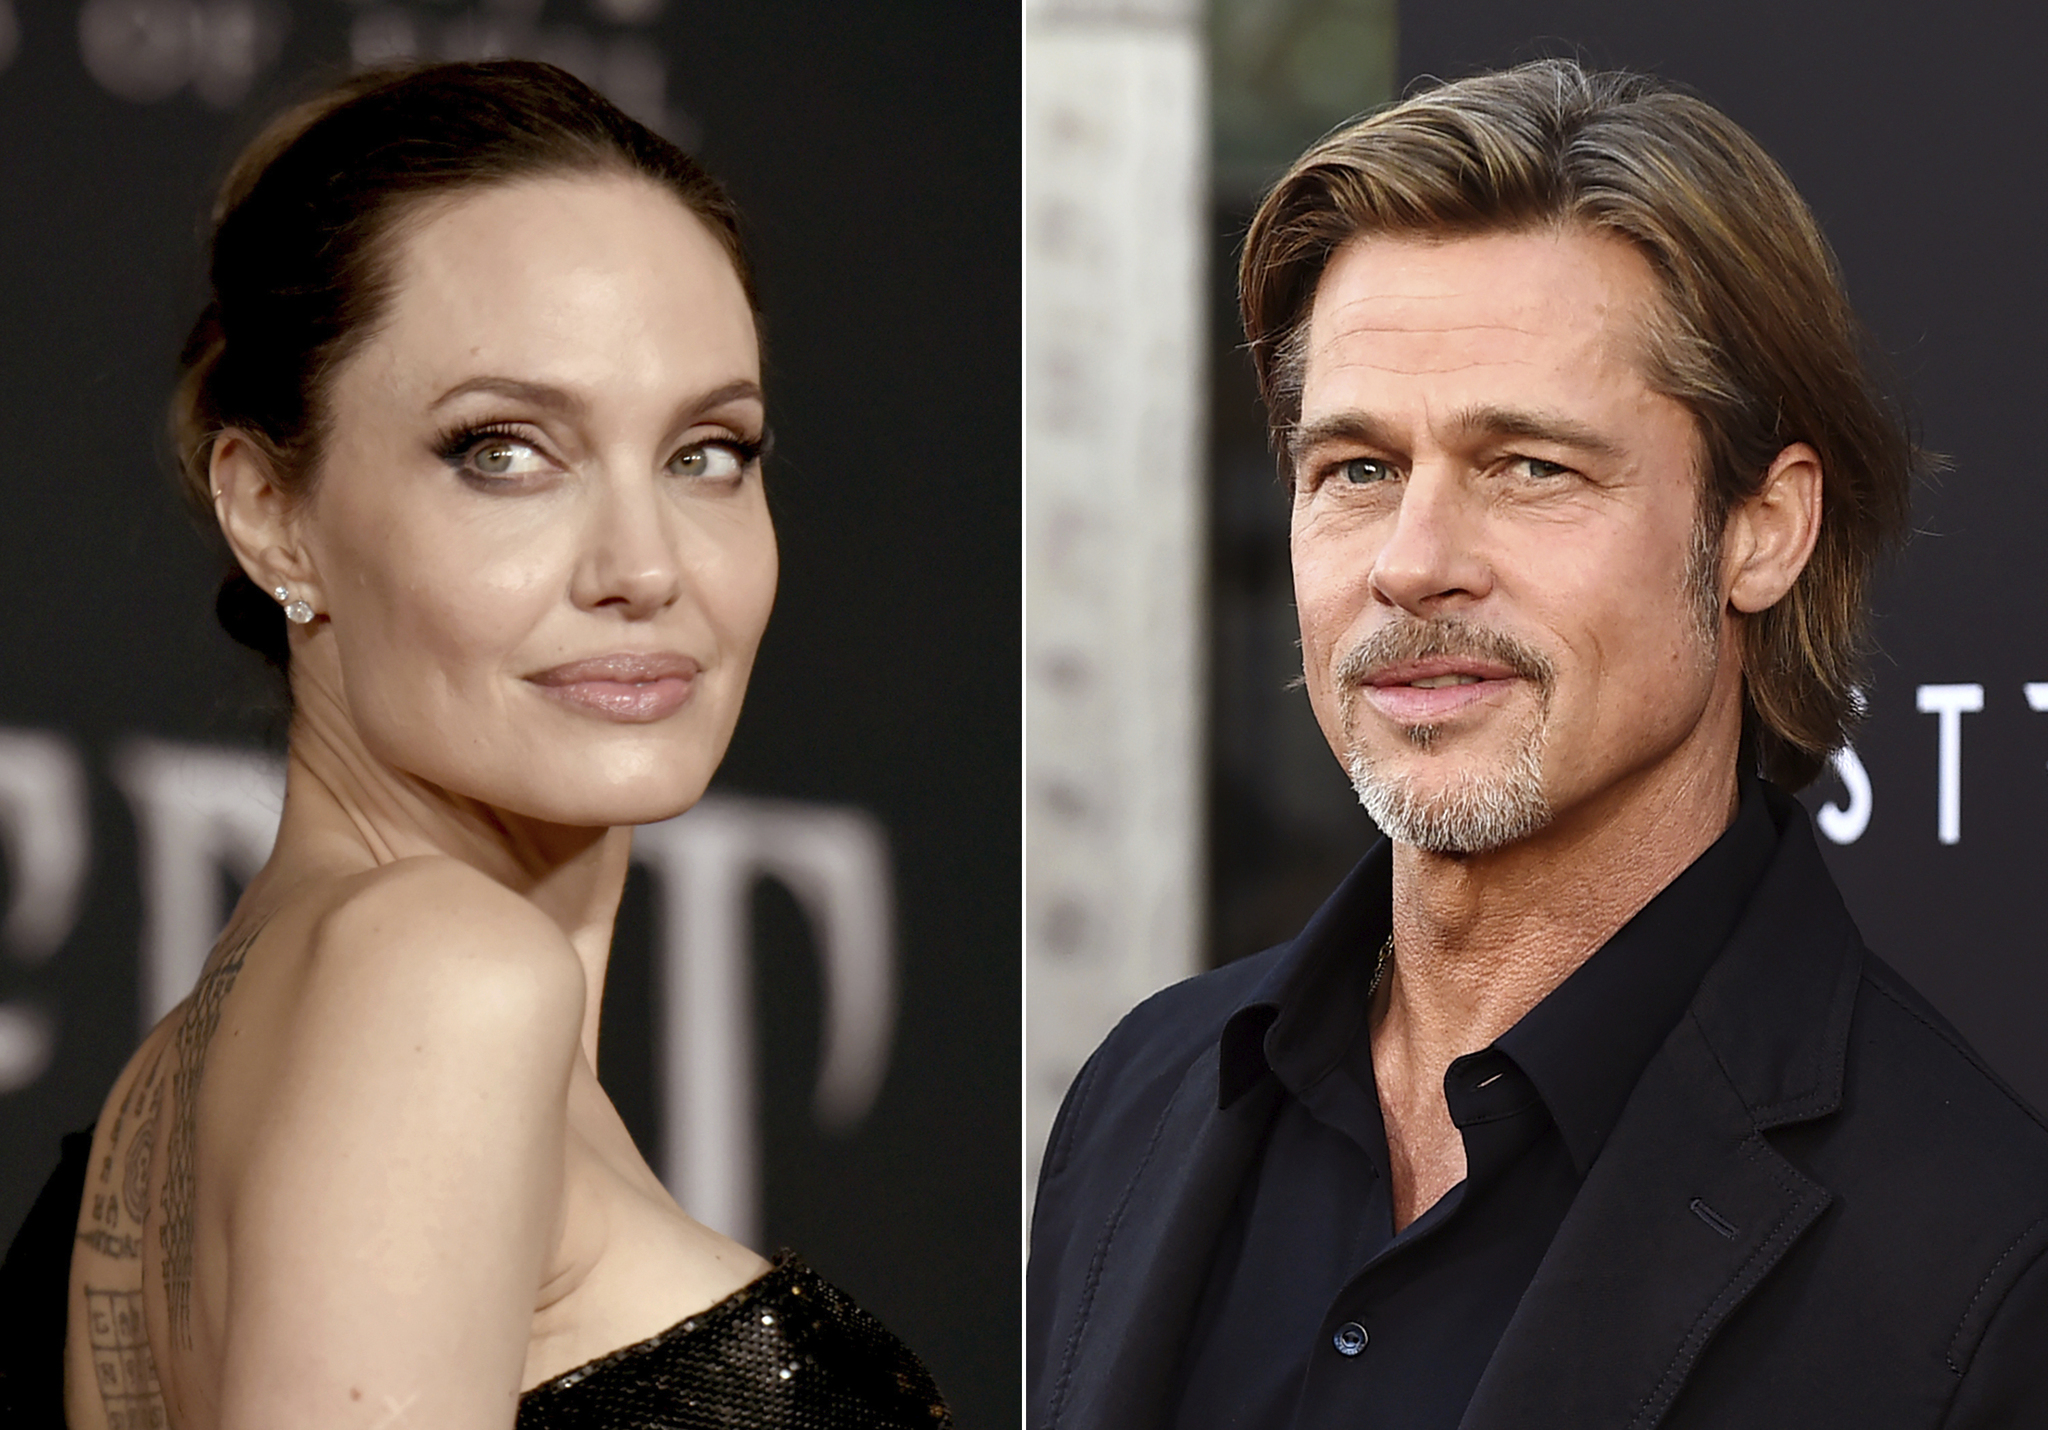 Brad Pitts history of physical abuse over Angelina Jolie allegedly started before infamous plane trip incident